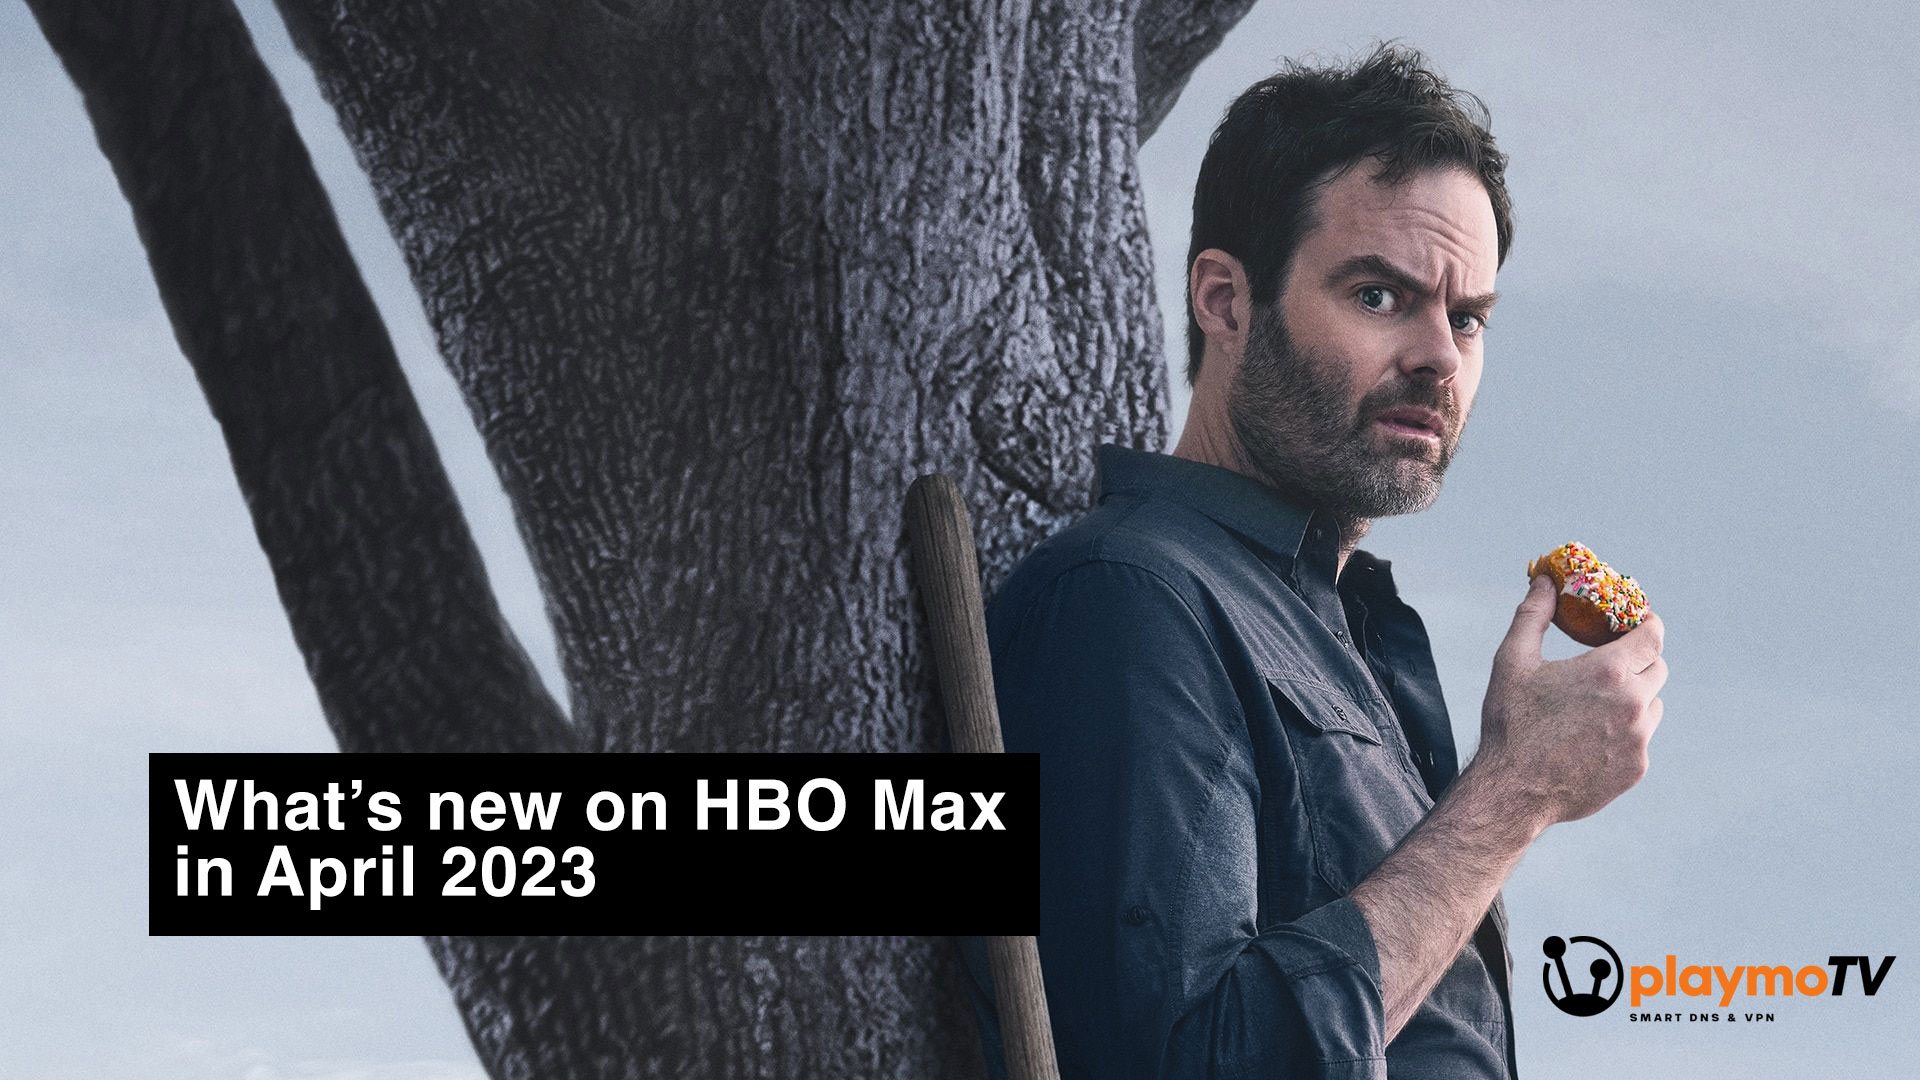 What's new on HBO Max in April 2023 playmoTV